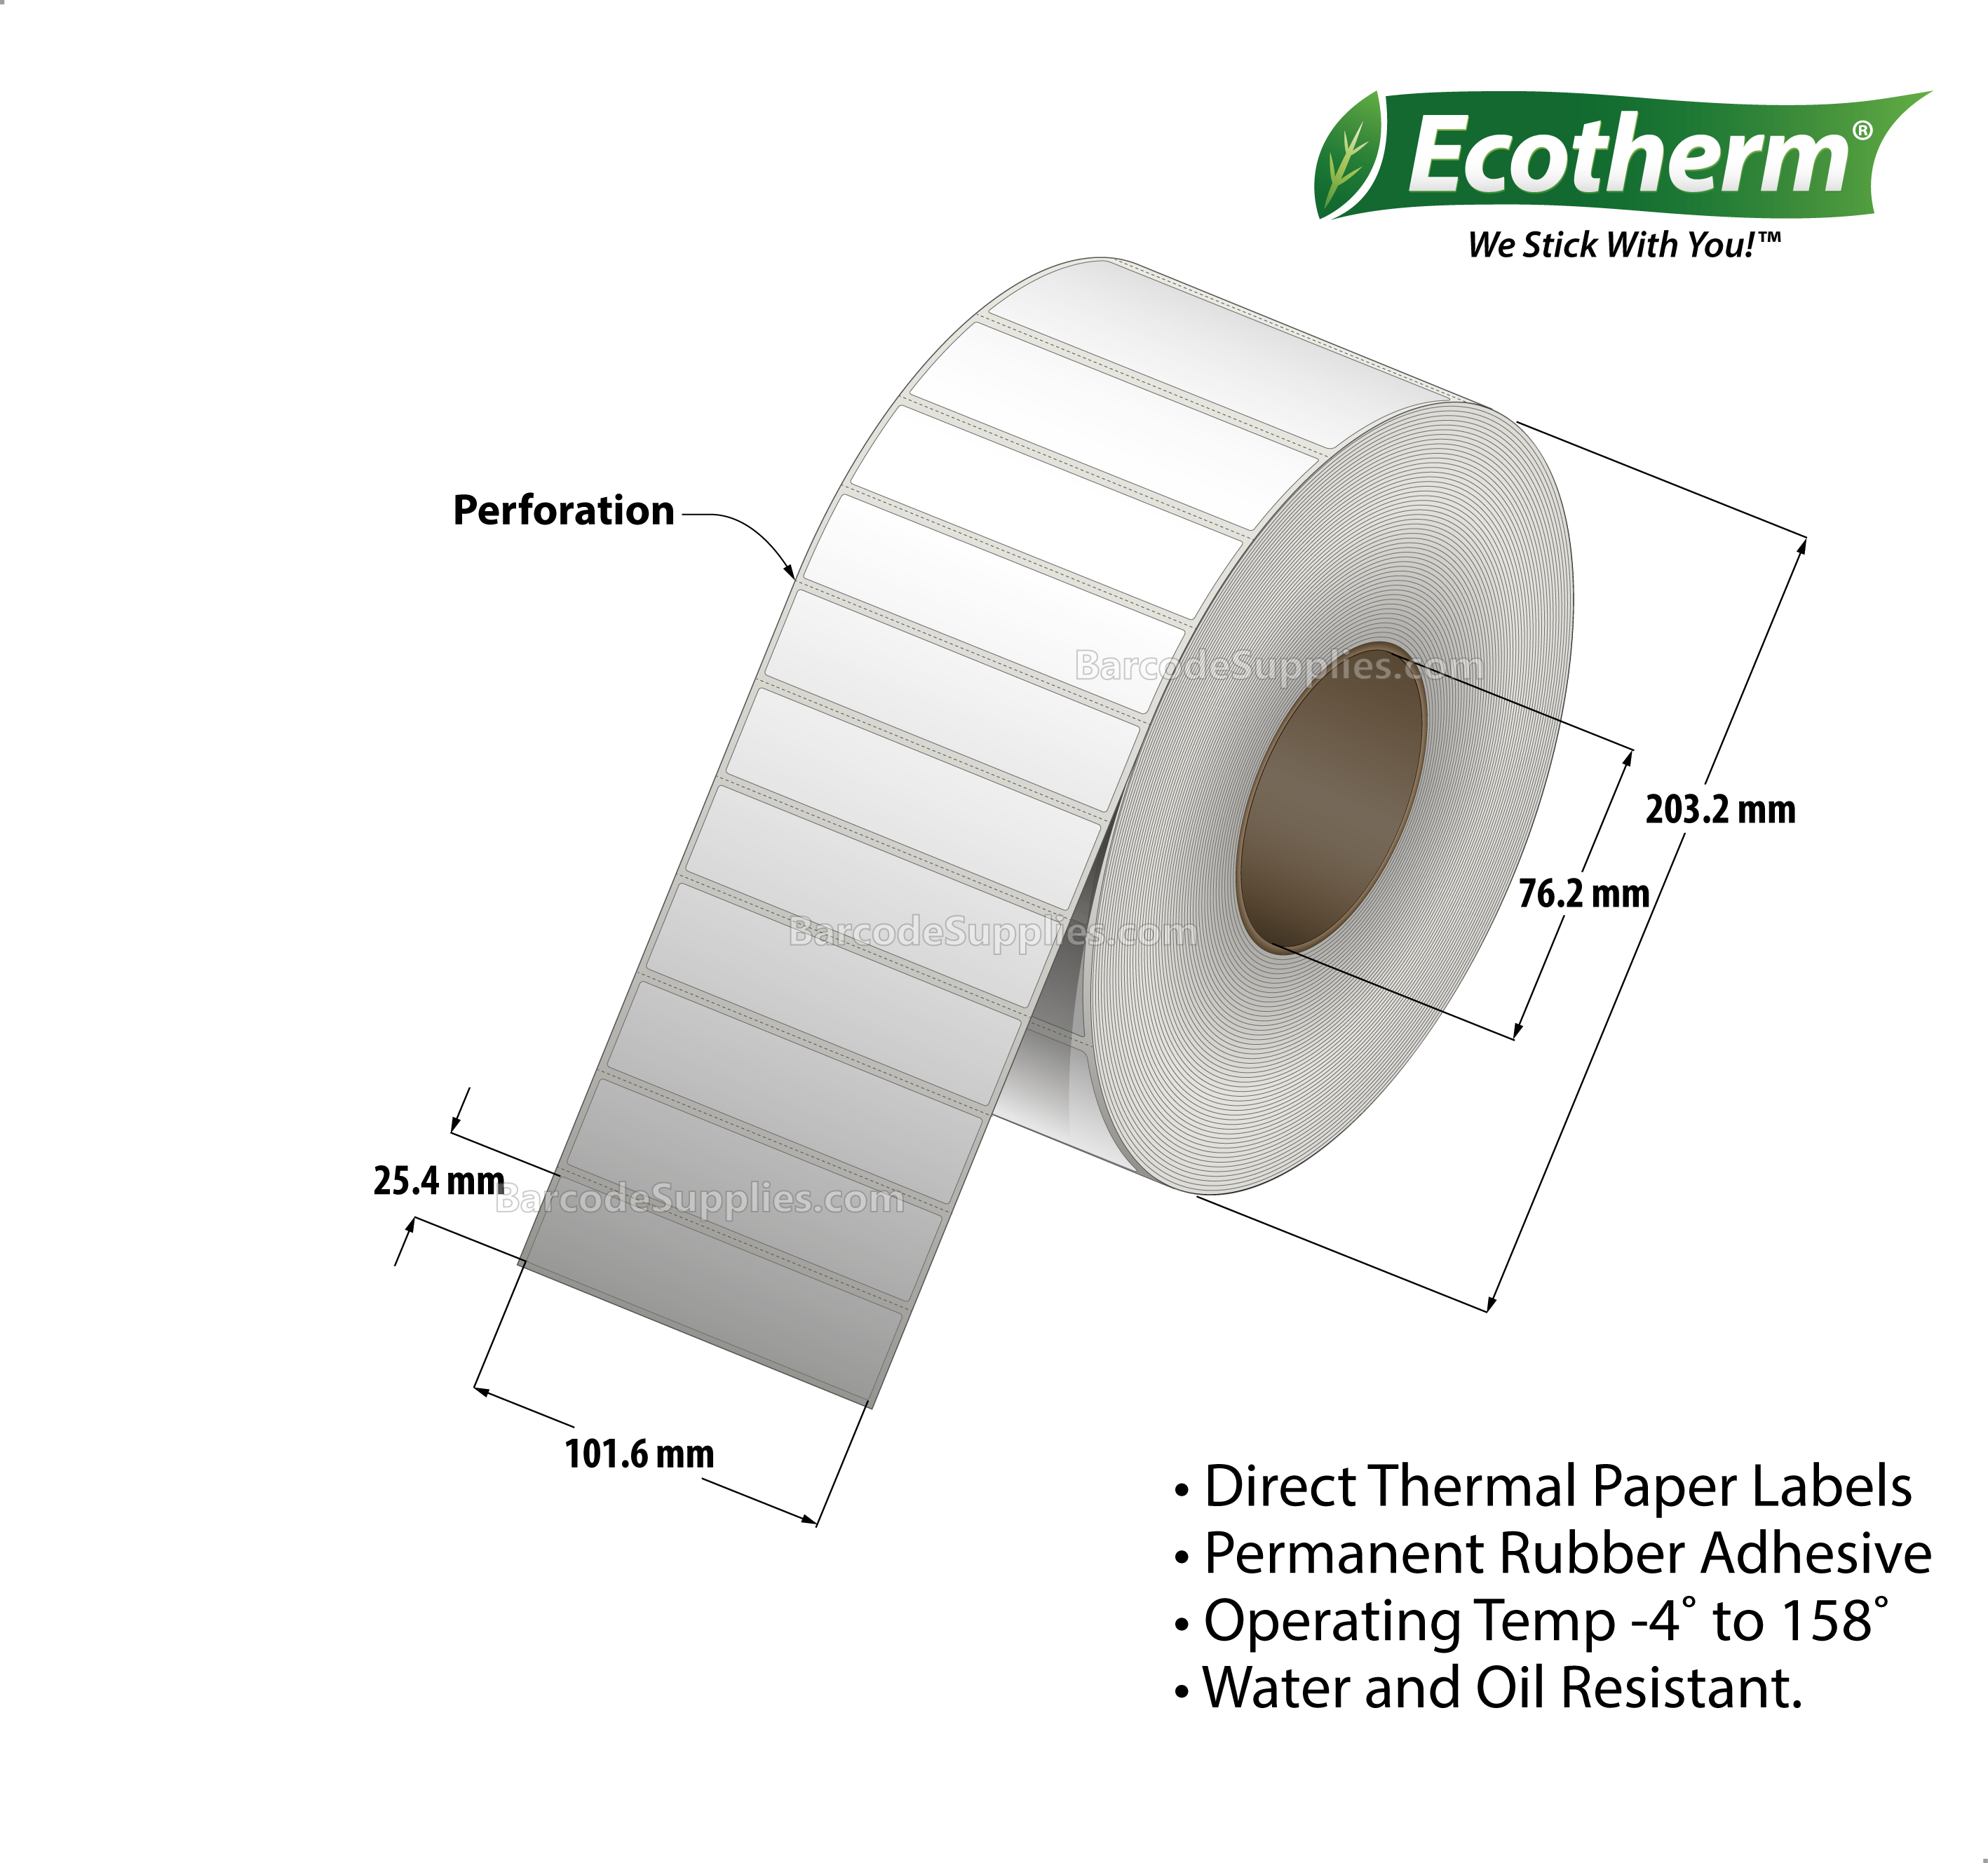 4 x 1 Direct Thermal White Labels With Rubber Adhesive - Perforated - 5600 Labels Per Roll - Carton Of 4 Rolls - 22400 Labels Total - MPN: DT8400100-3P-4